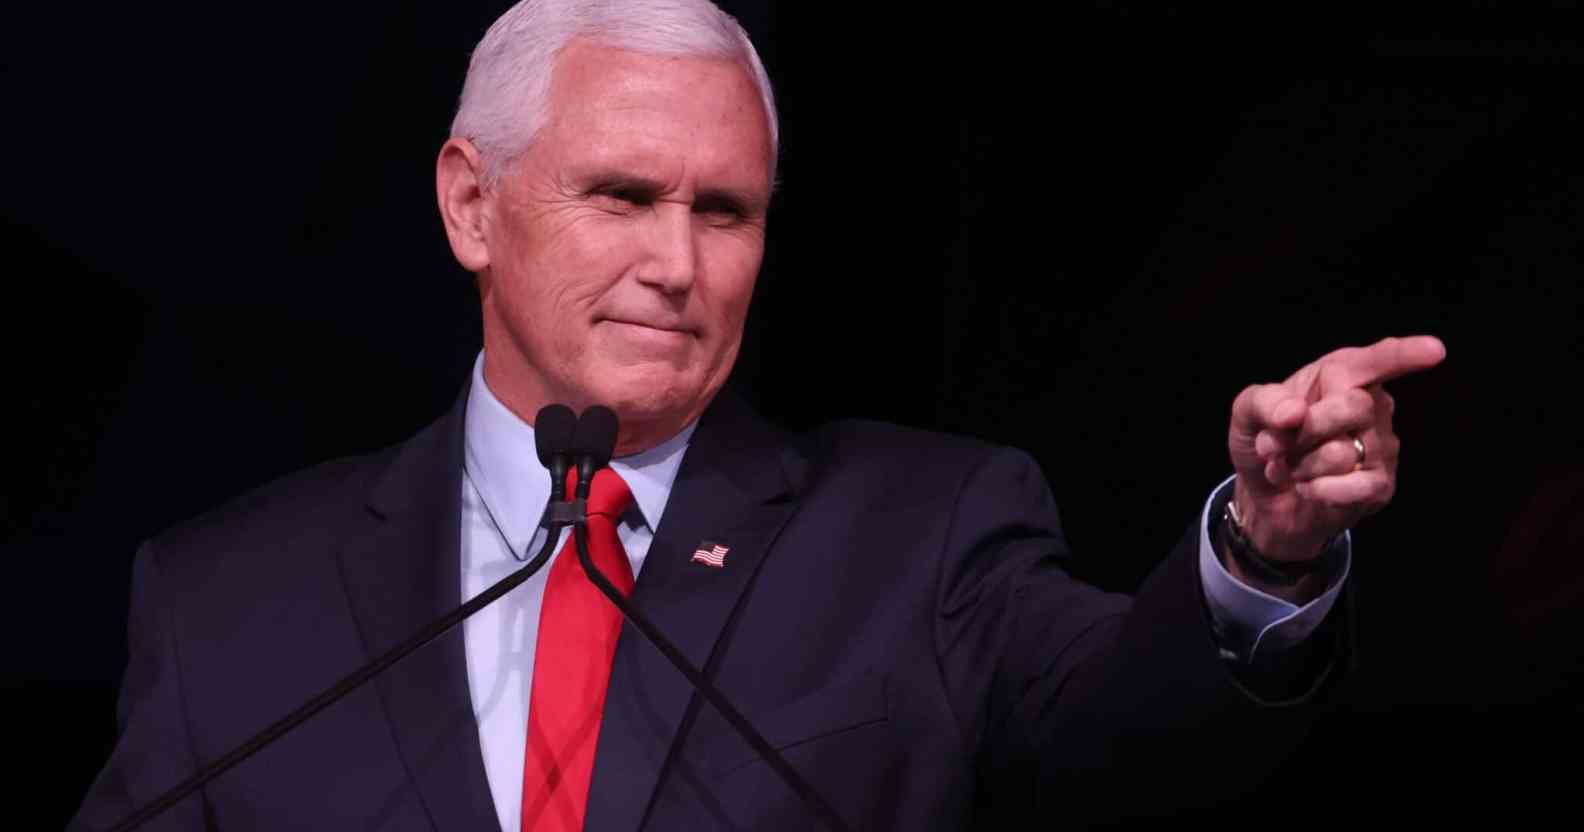 Mike Pence in a suit points